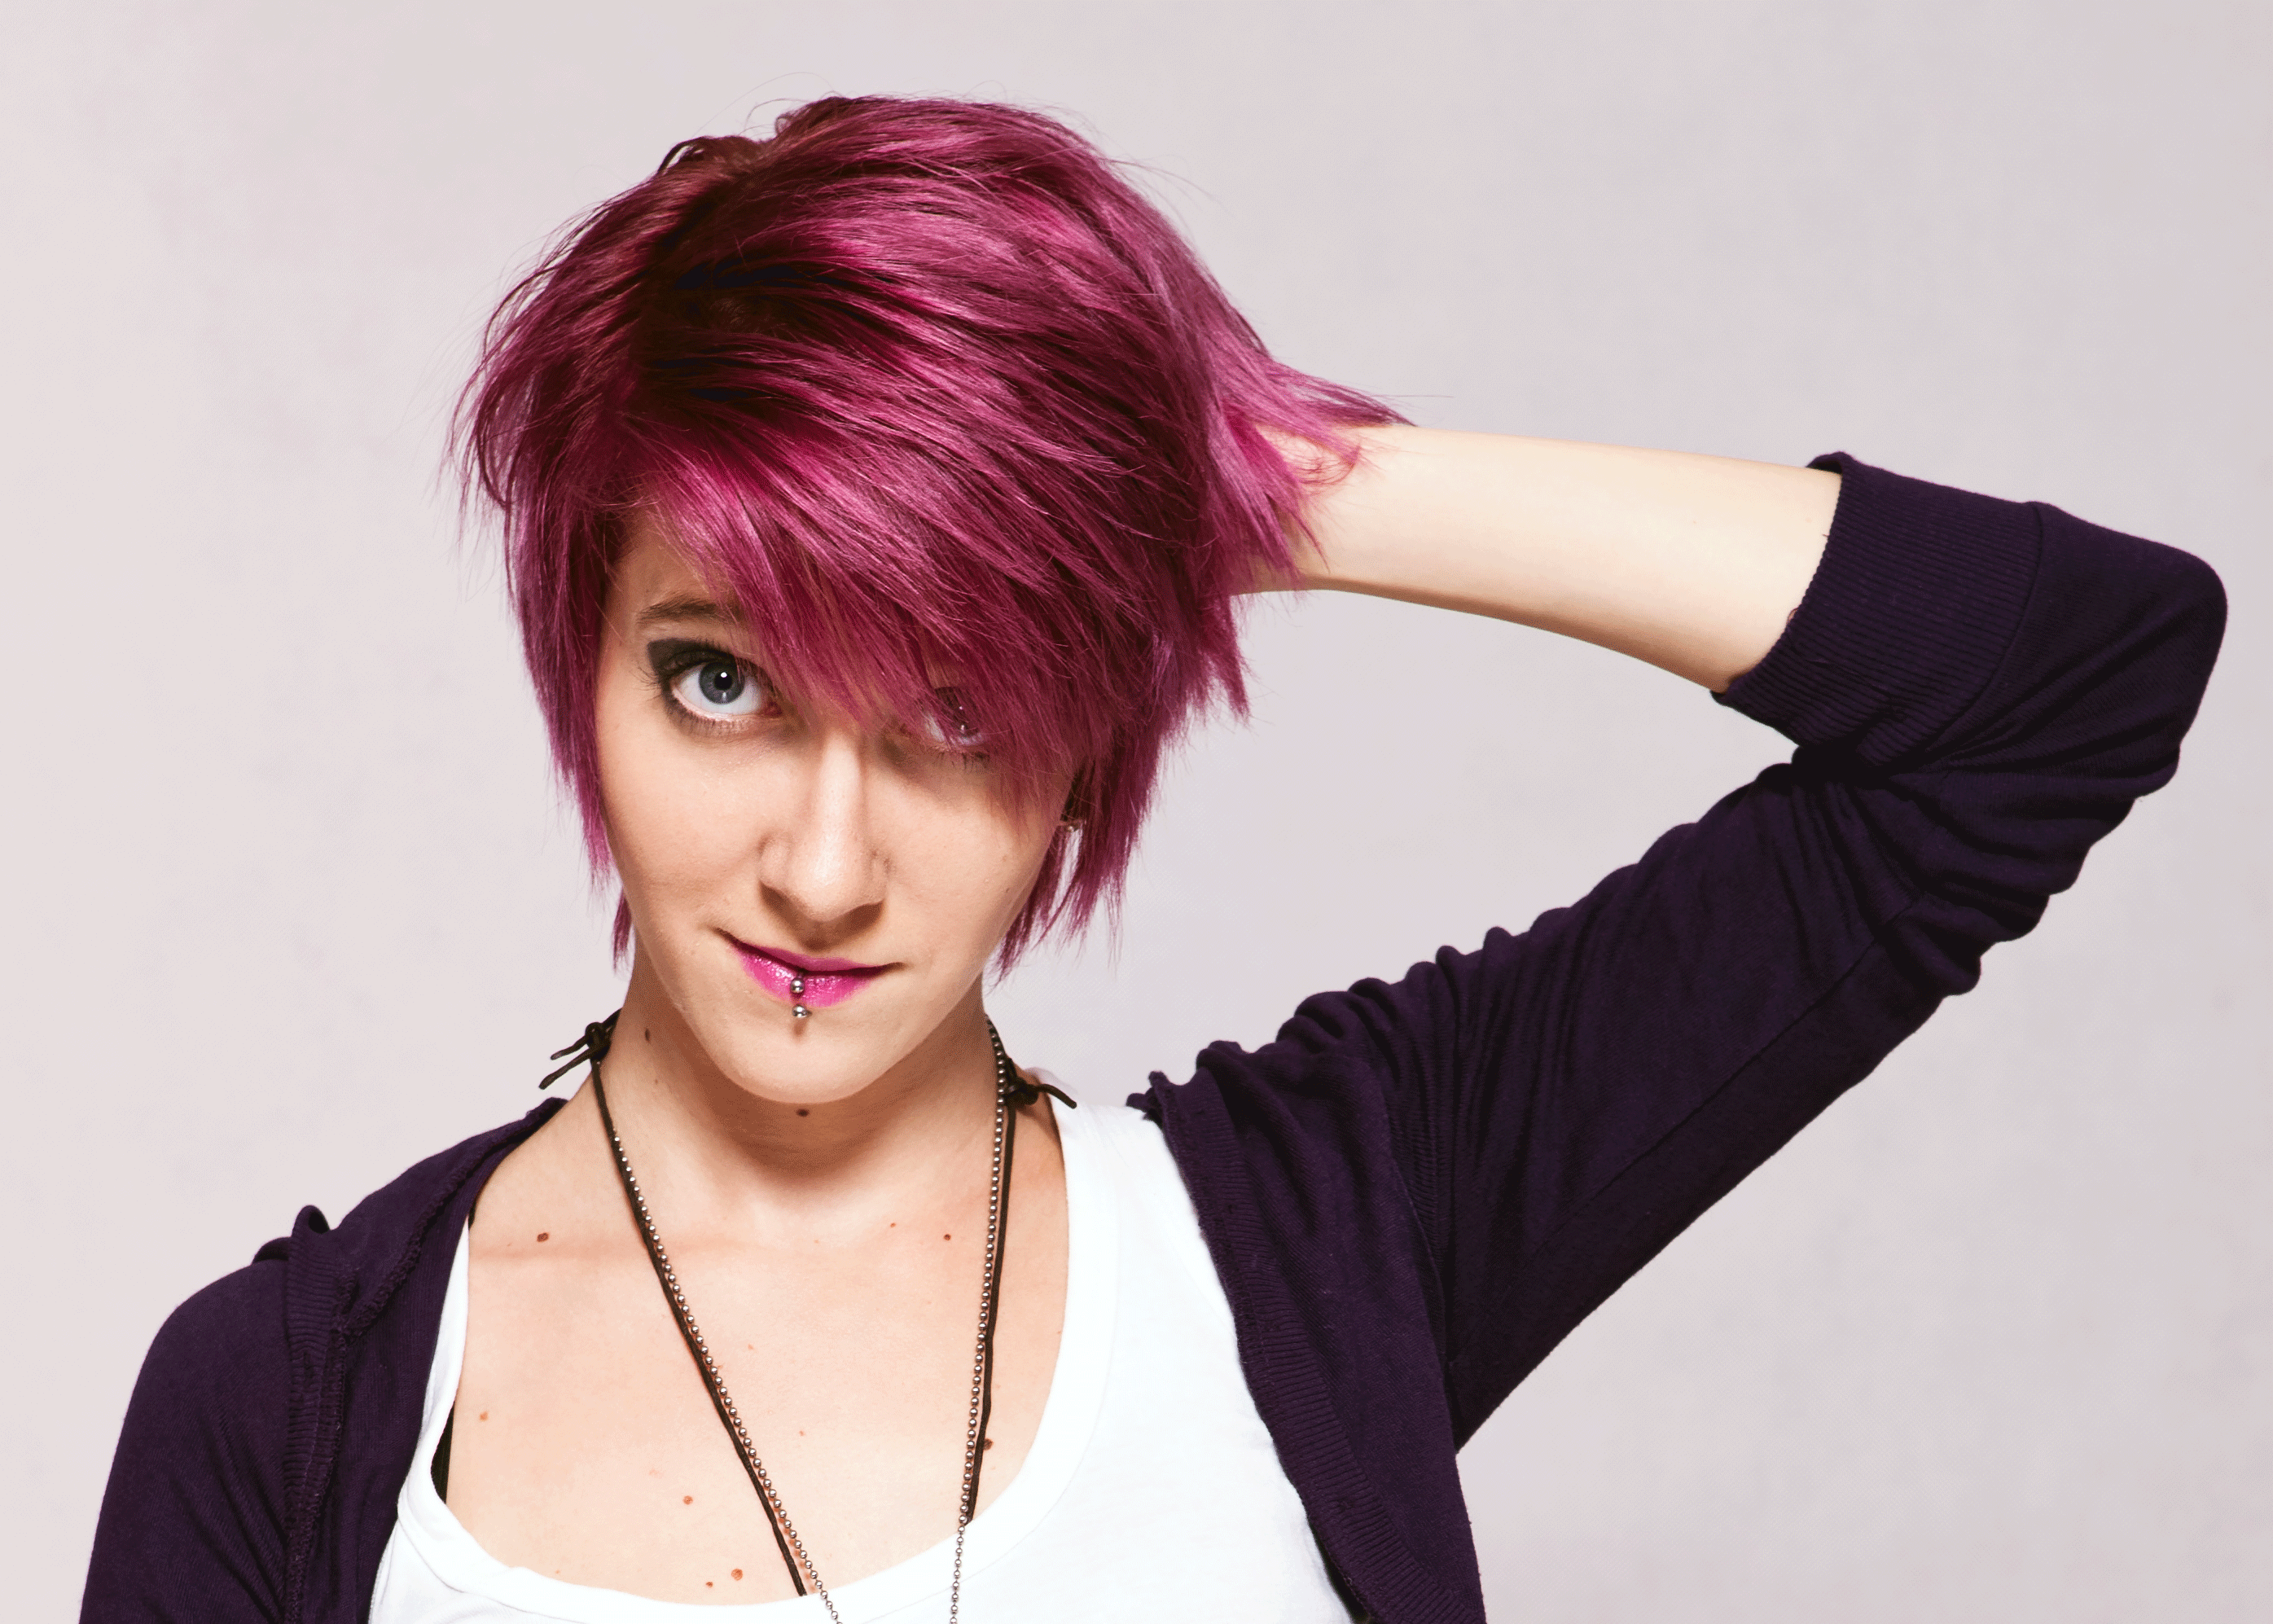 Woman with dyed hair